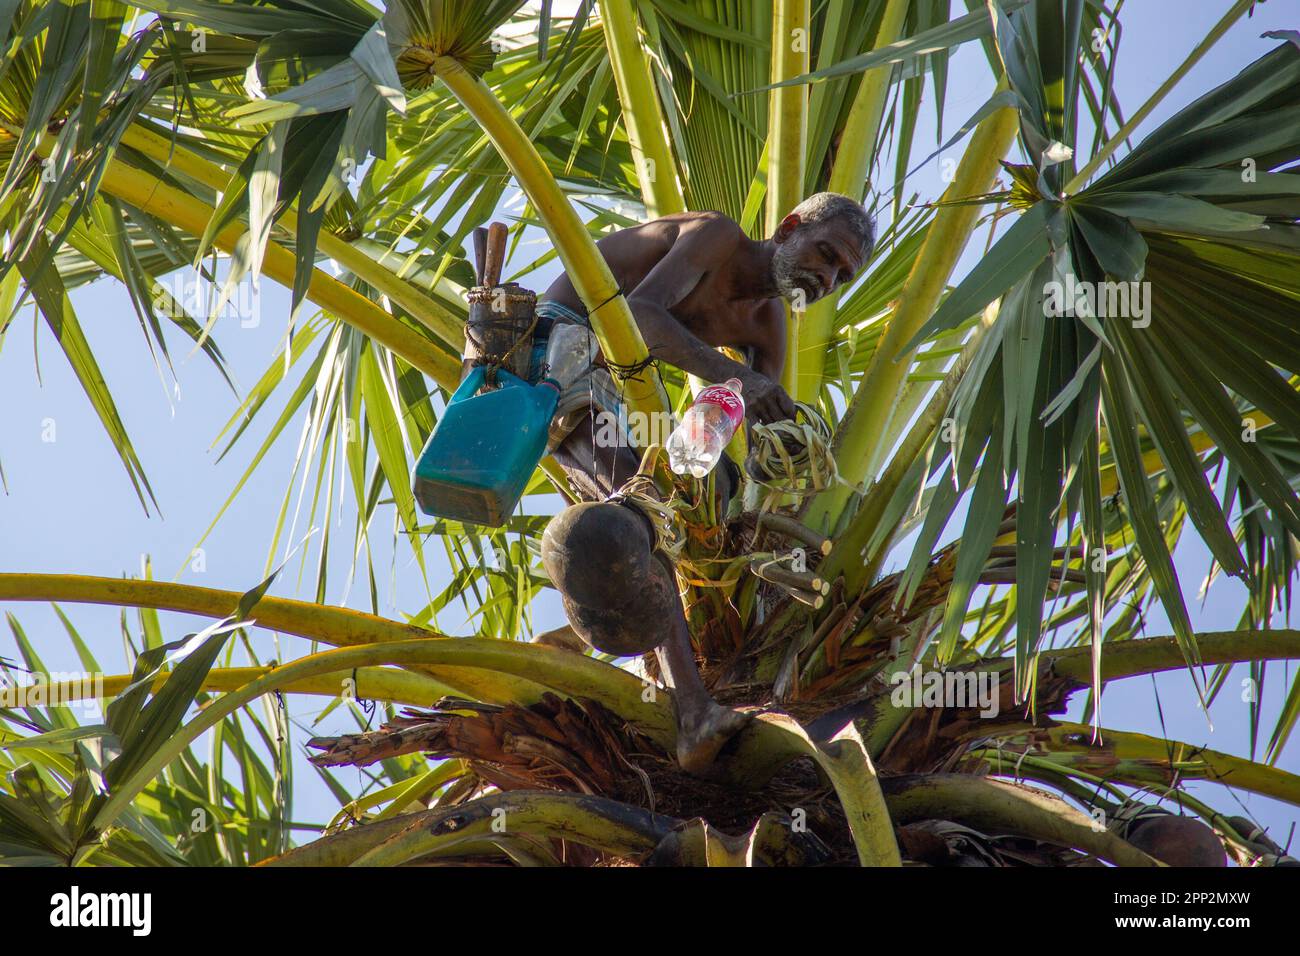 Kanthaiya Rasarathnam collects palm wine, also known as toddy, in Jaffna, Sri Lanka on Feb. 15, 2023. Rasarathnam, who has sold toddy for 49 years, says it is a dangerous but lucrative business. He prays to God, he says, as he climbs the trees. (Vijayatharsiny Thinesh/Global Press Journal) Stock Photo